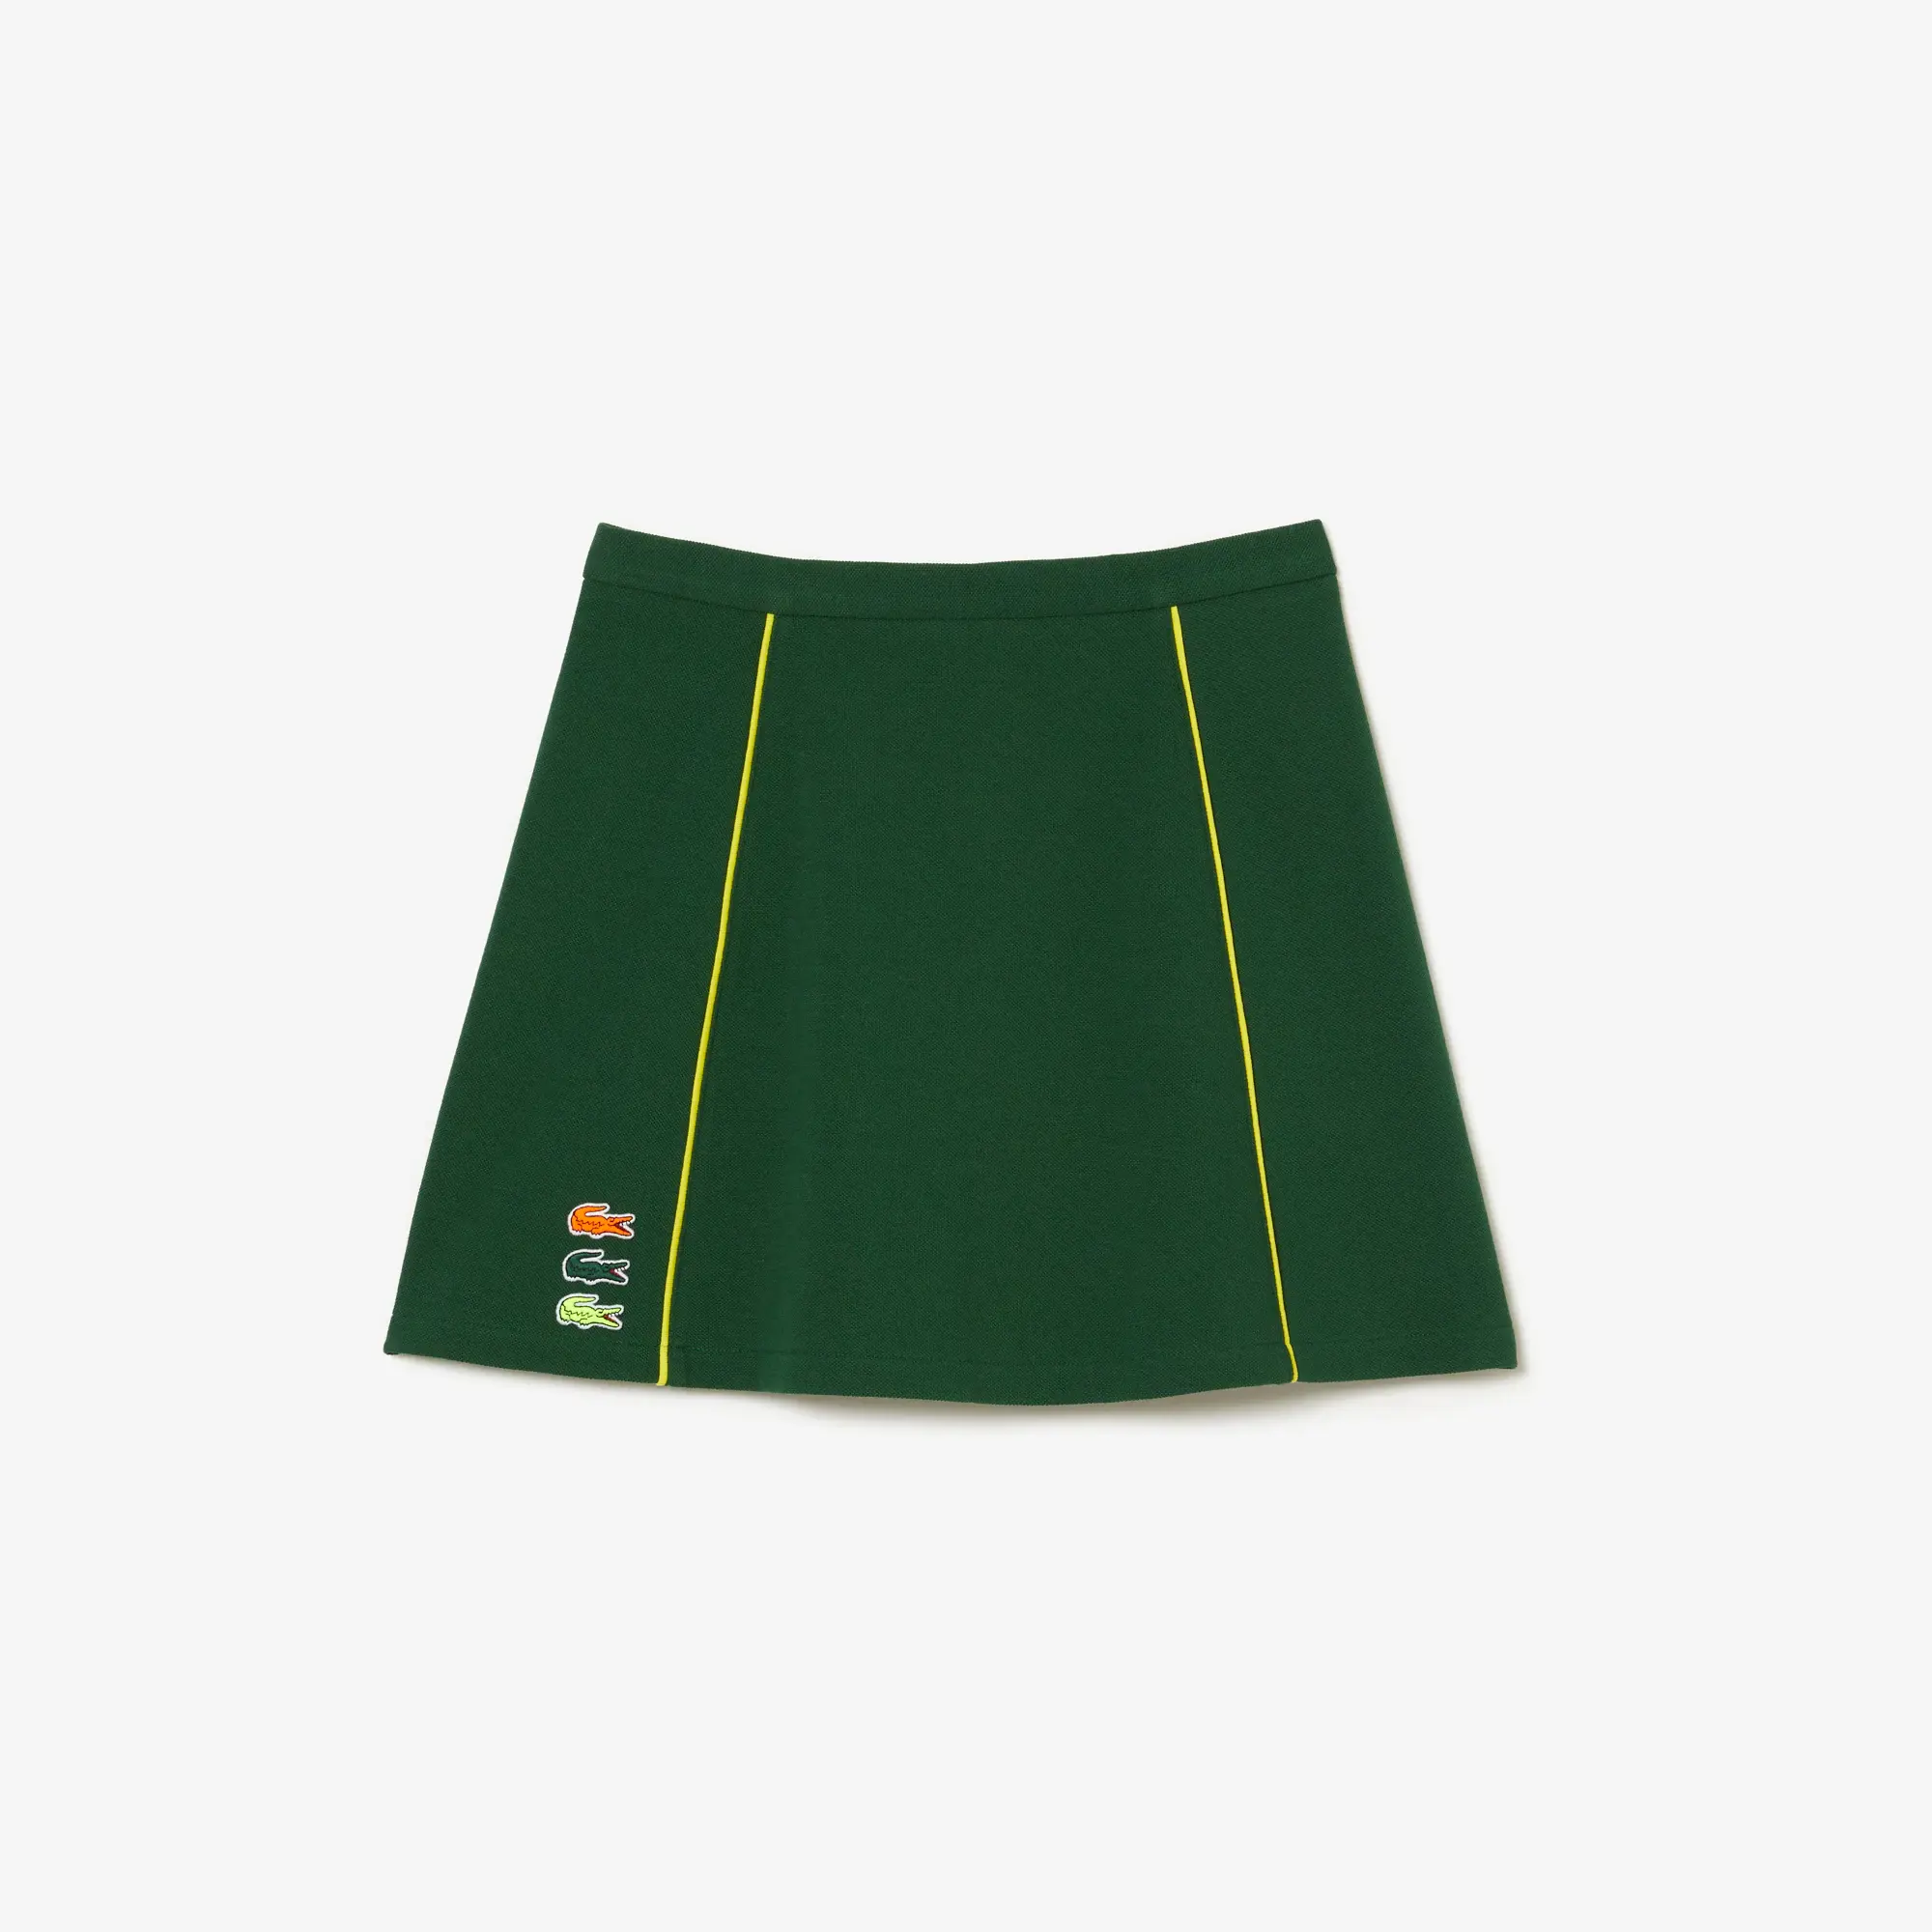 Lacoste Women’s Made In France Organic Cotton Skirt. 2